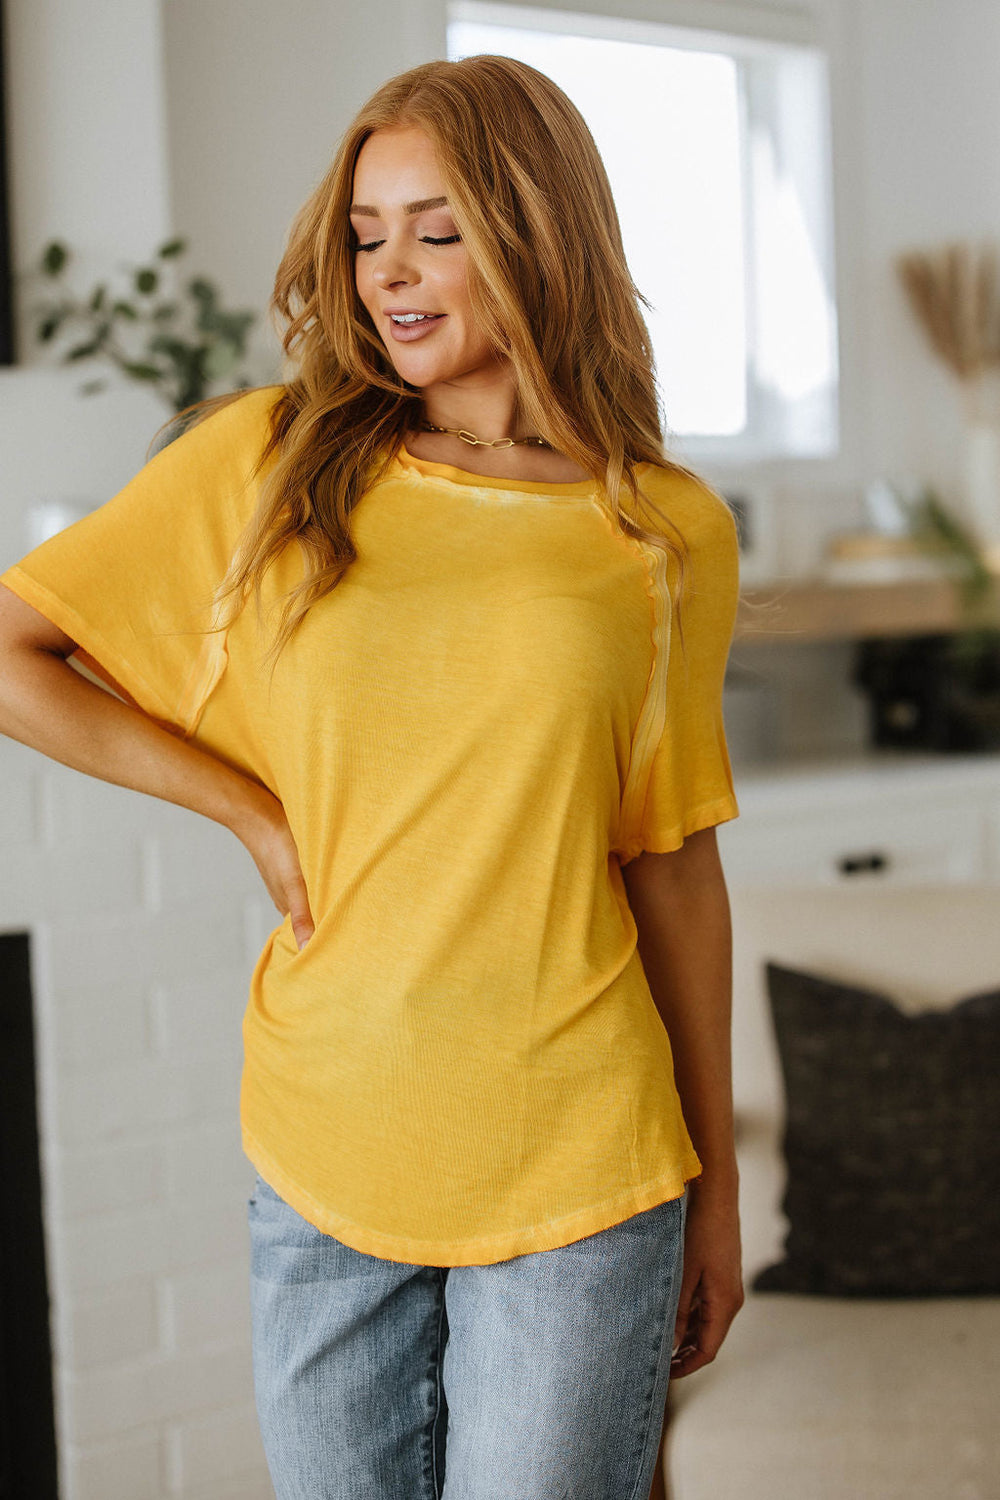 New Edition Mineral Wash T Shirt Yellow-Short Sleeve Tops-Inspired by Justeen-Women's Clothing Boutique in Chicago, Illinois